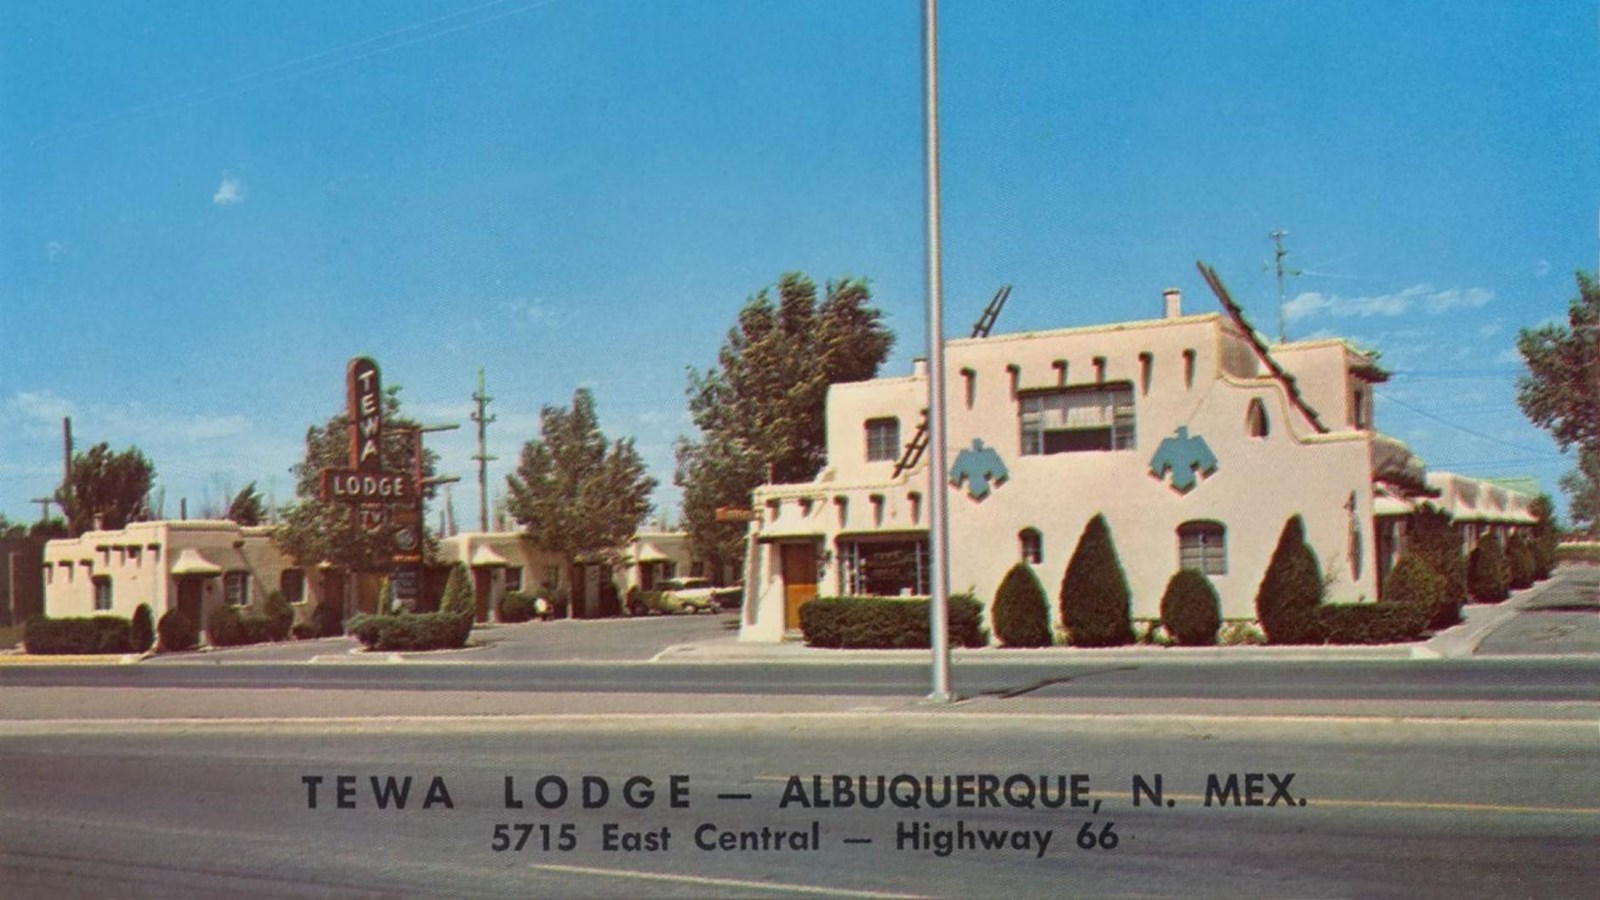 A historic postcard of a white stucco building with teal detailing; it reads 